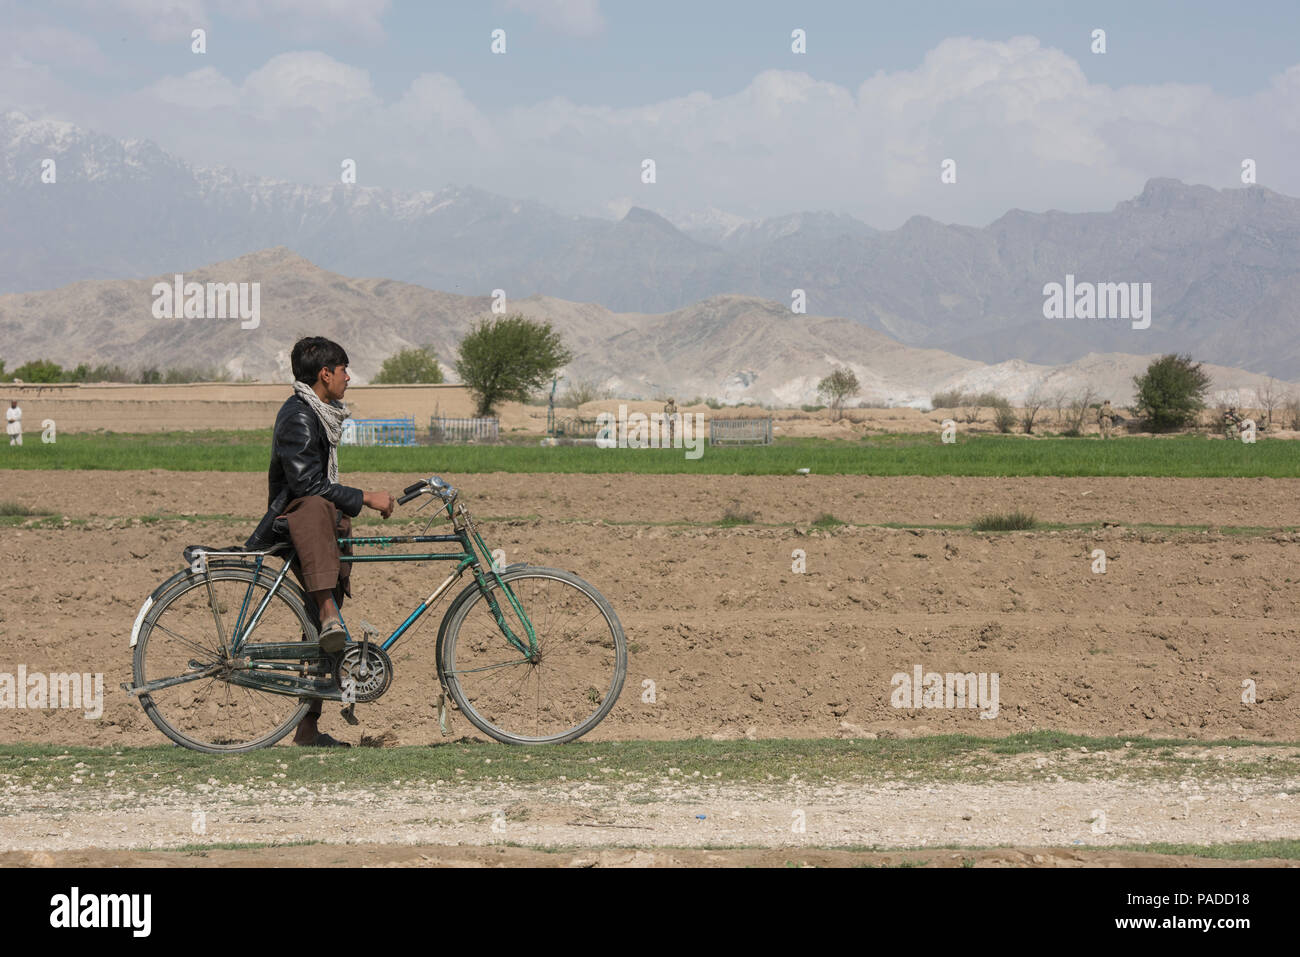 Royal familie køleskab depositum An Afghan boy stops on his bike in Khanjar Khel, Parwan Province,  Afghanistan, to watch as U.S. Army Explosive Ordnance Disposal technicians  secure the site of a crashed F-16 Fighting Falcon from